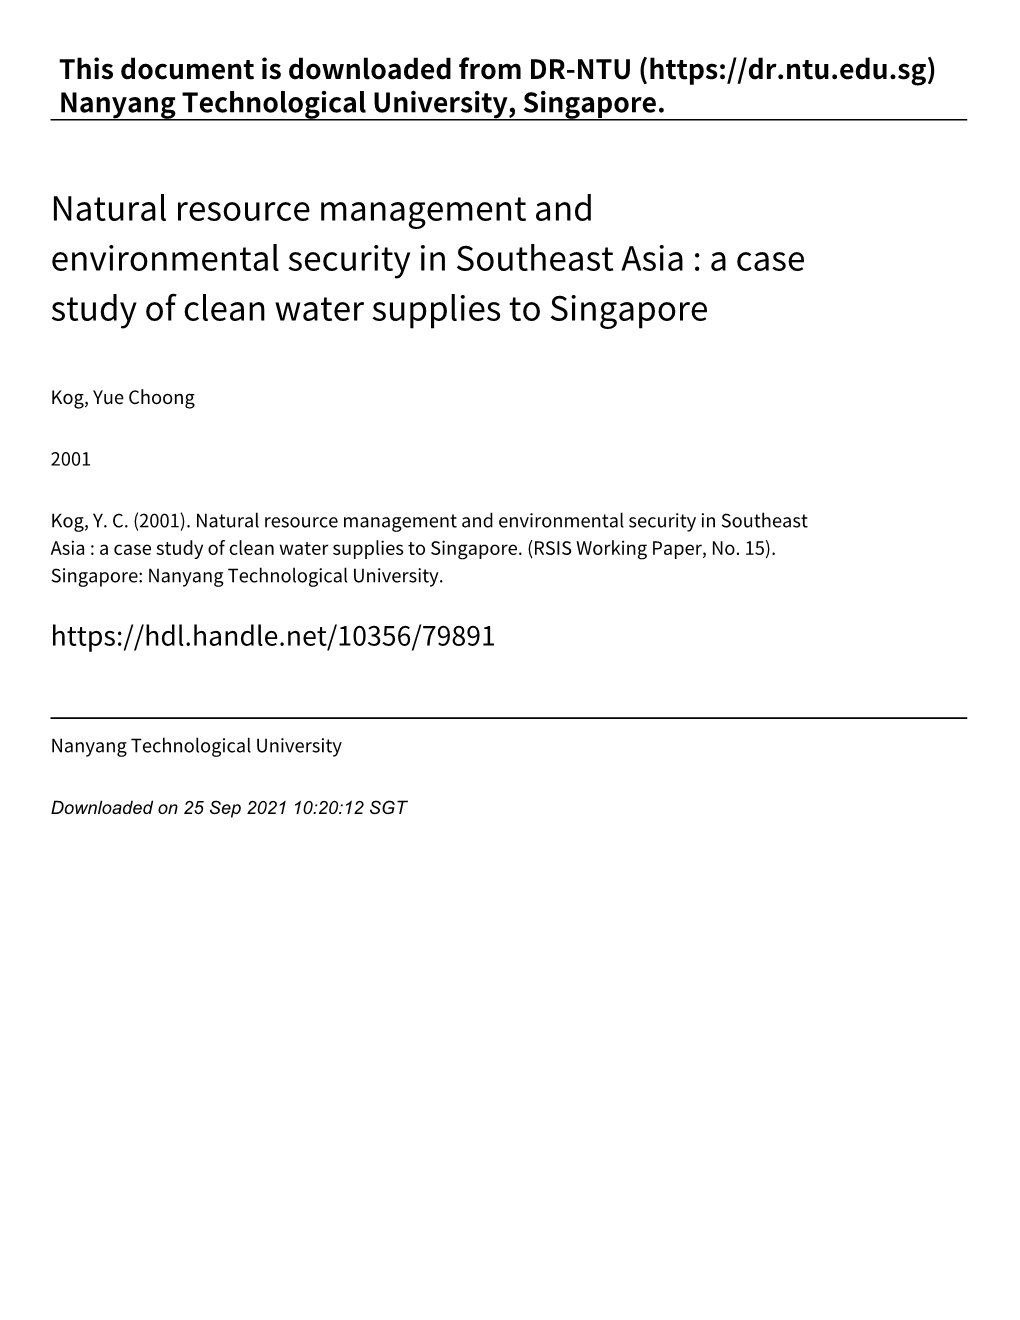 Natural Resource Management and Environmental Security in Southeast Asia : a Case Study of Clean Water Supplies to Singapore